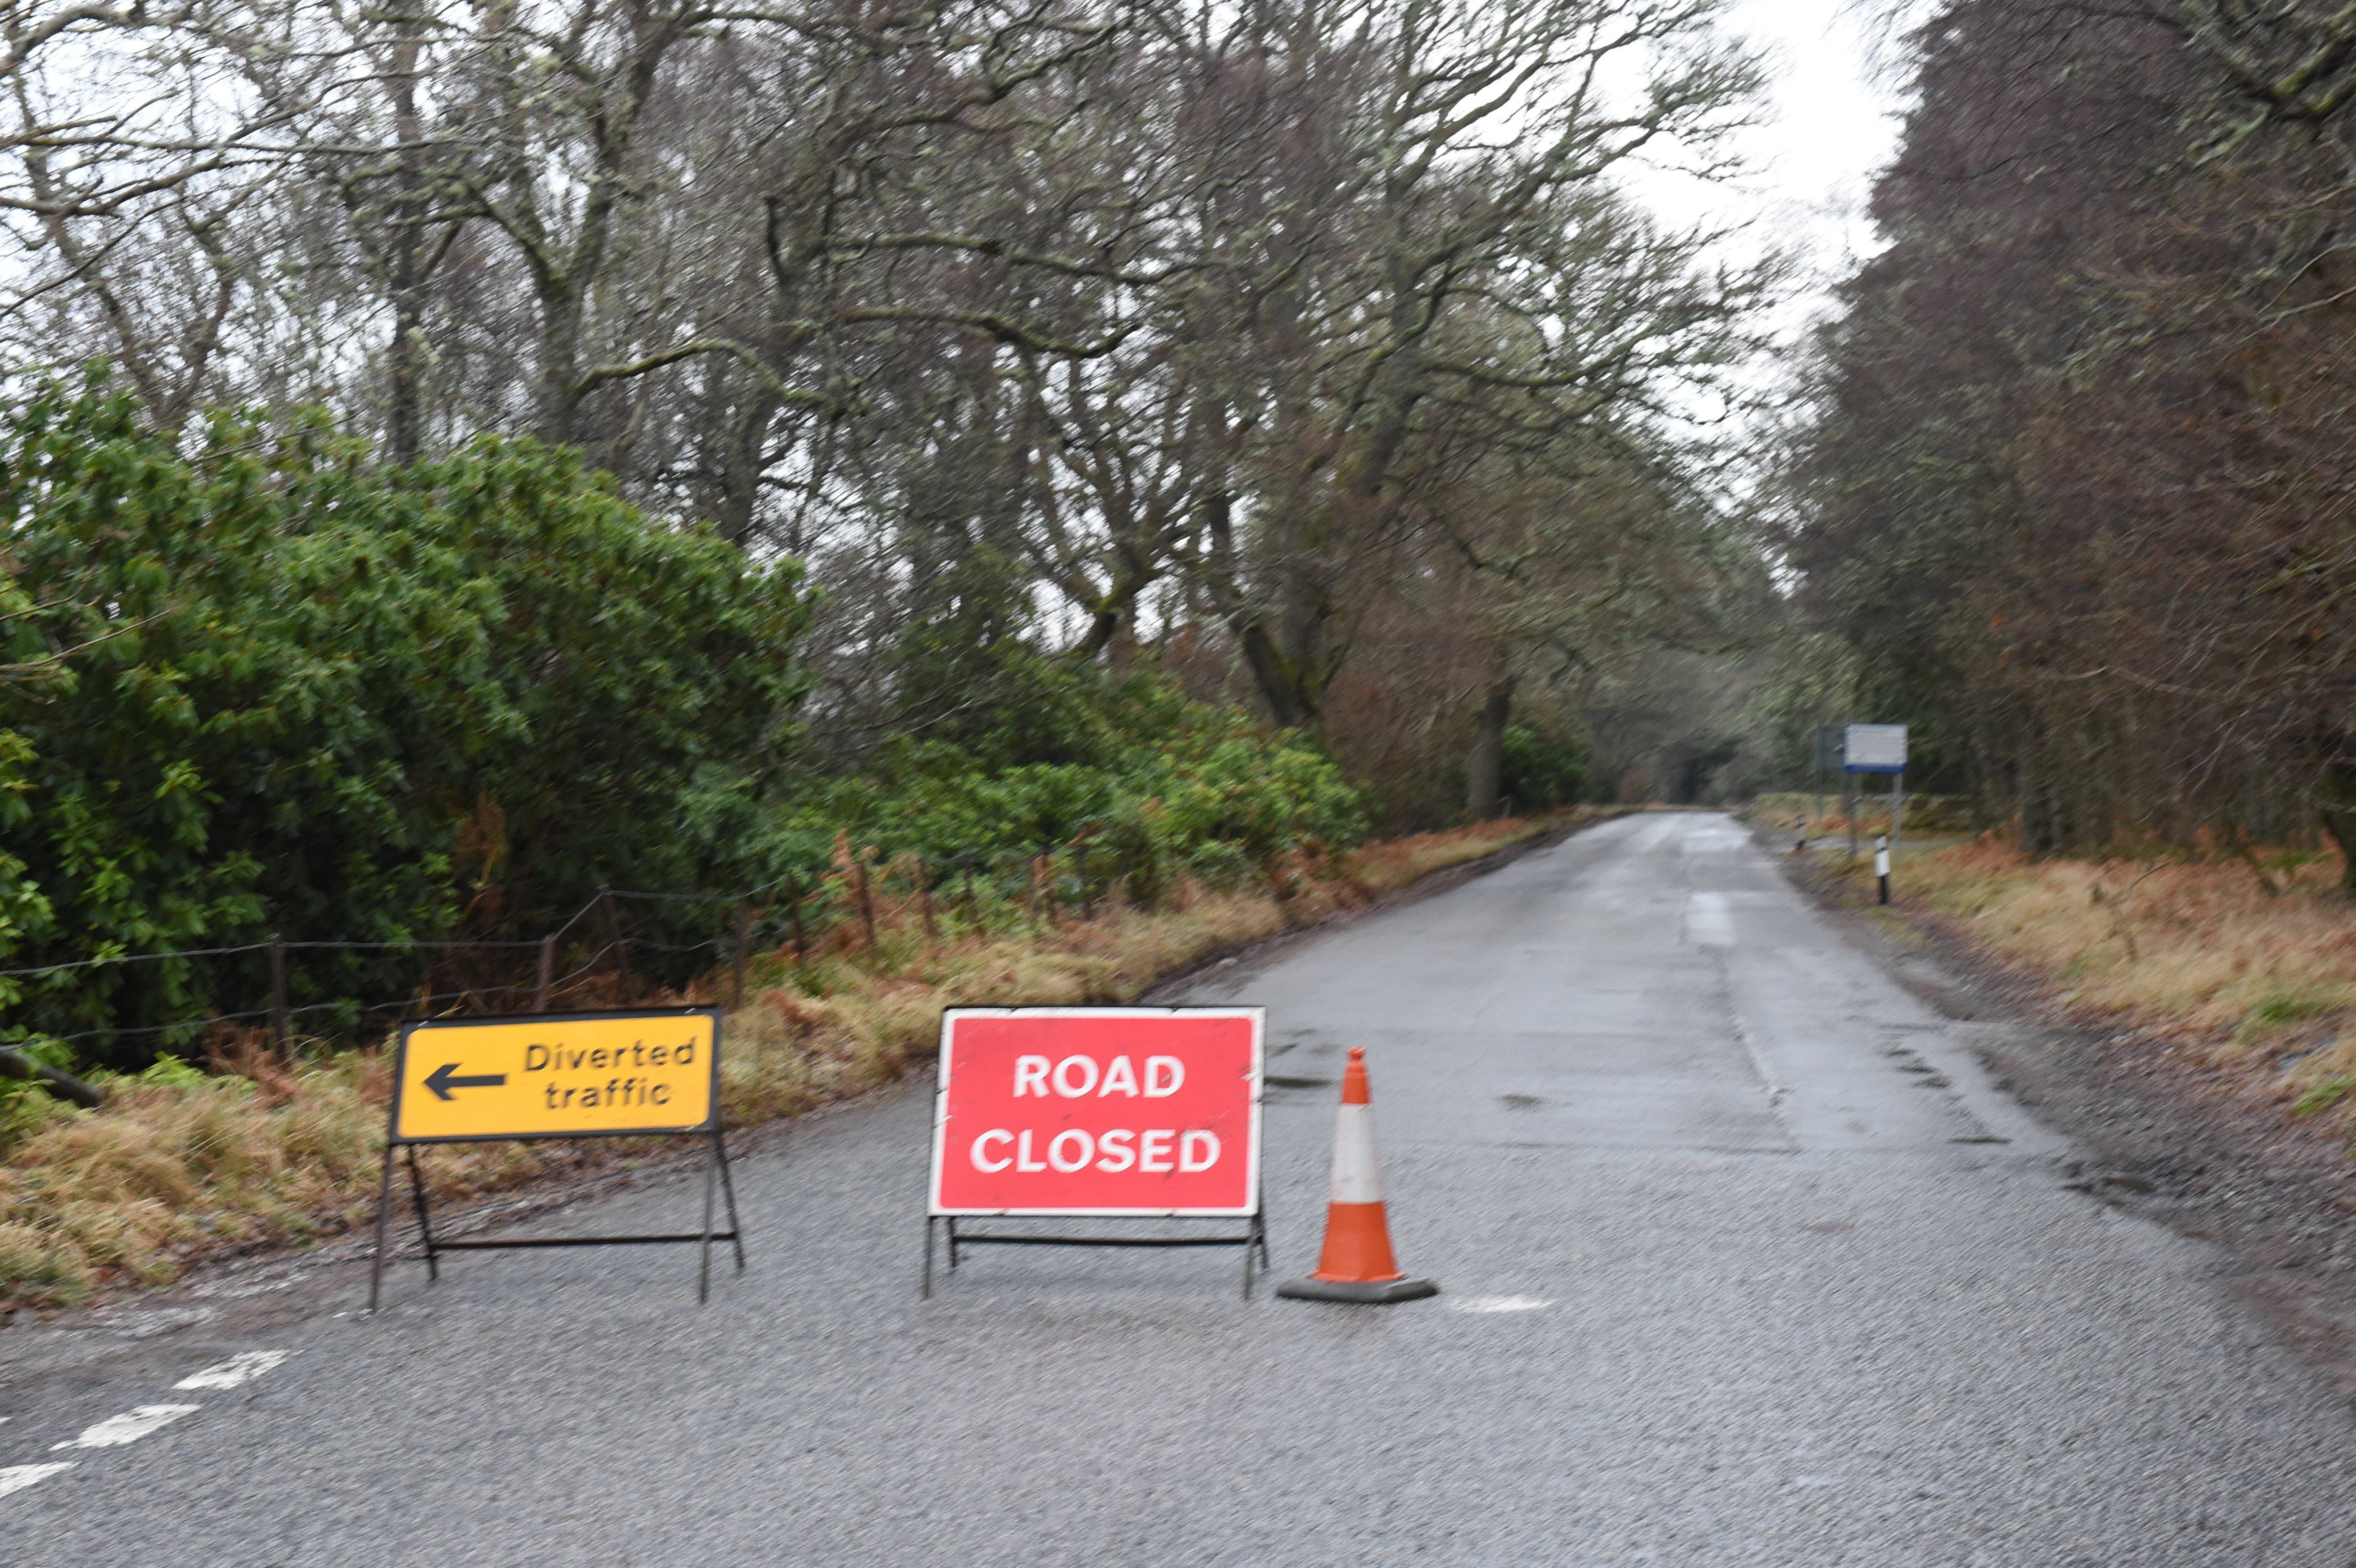 Police have closed the B976 between the Aboyne turn-off and Dinnet Bridge.